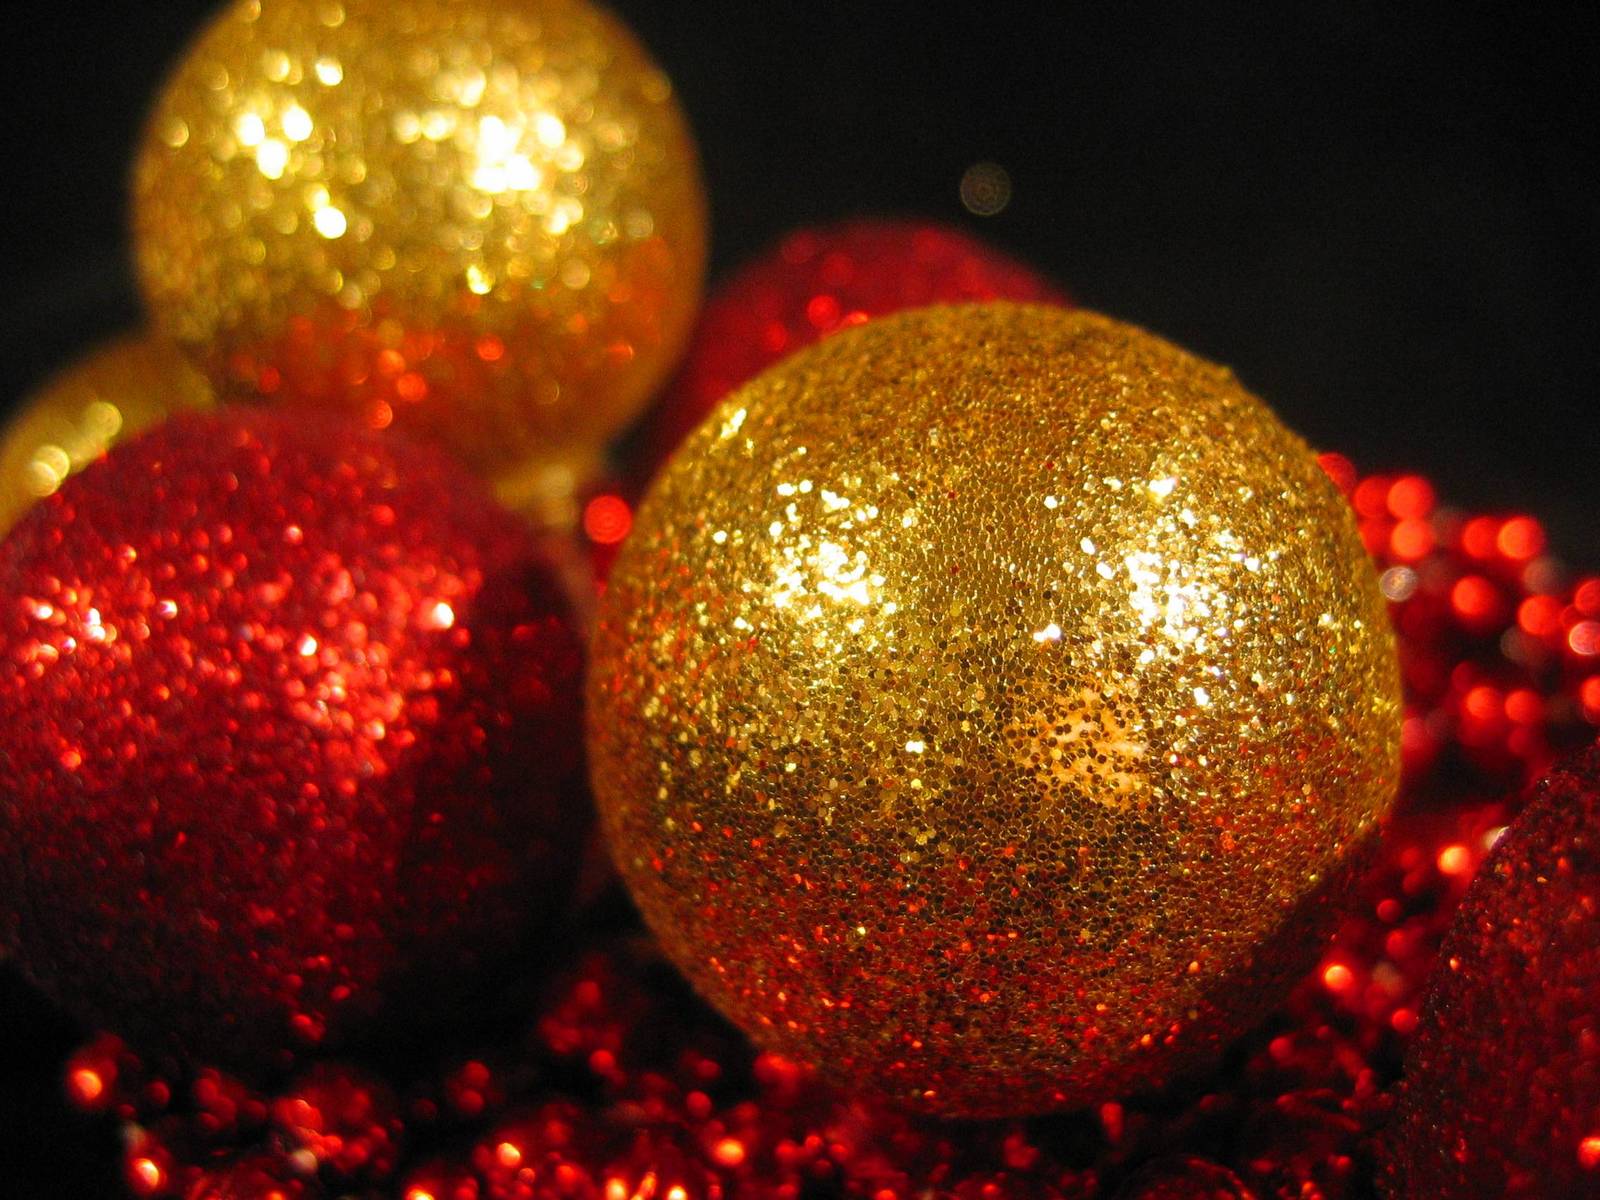 a close up view of red and gold glitter balls